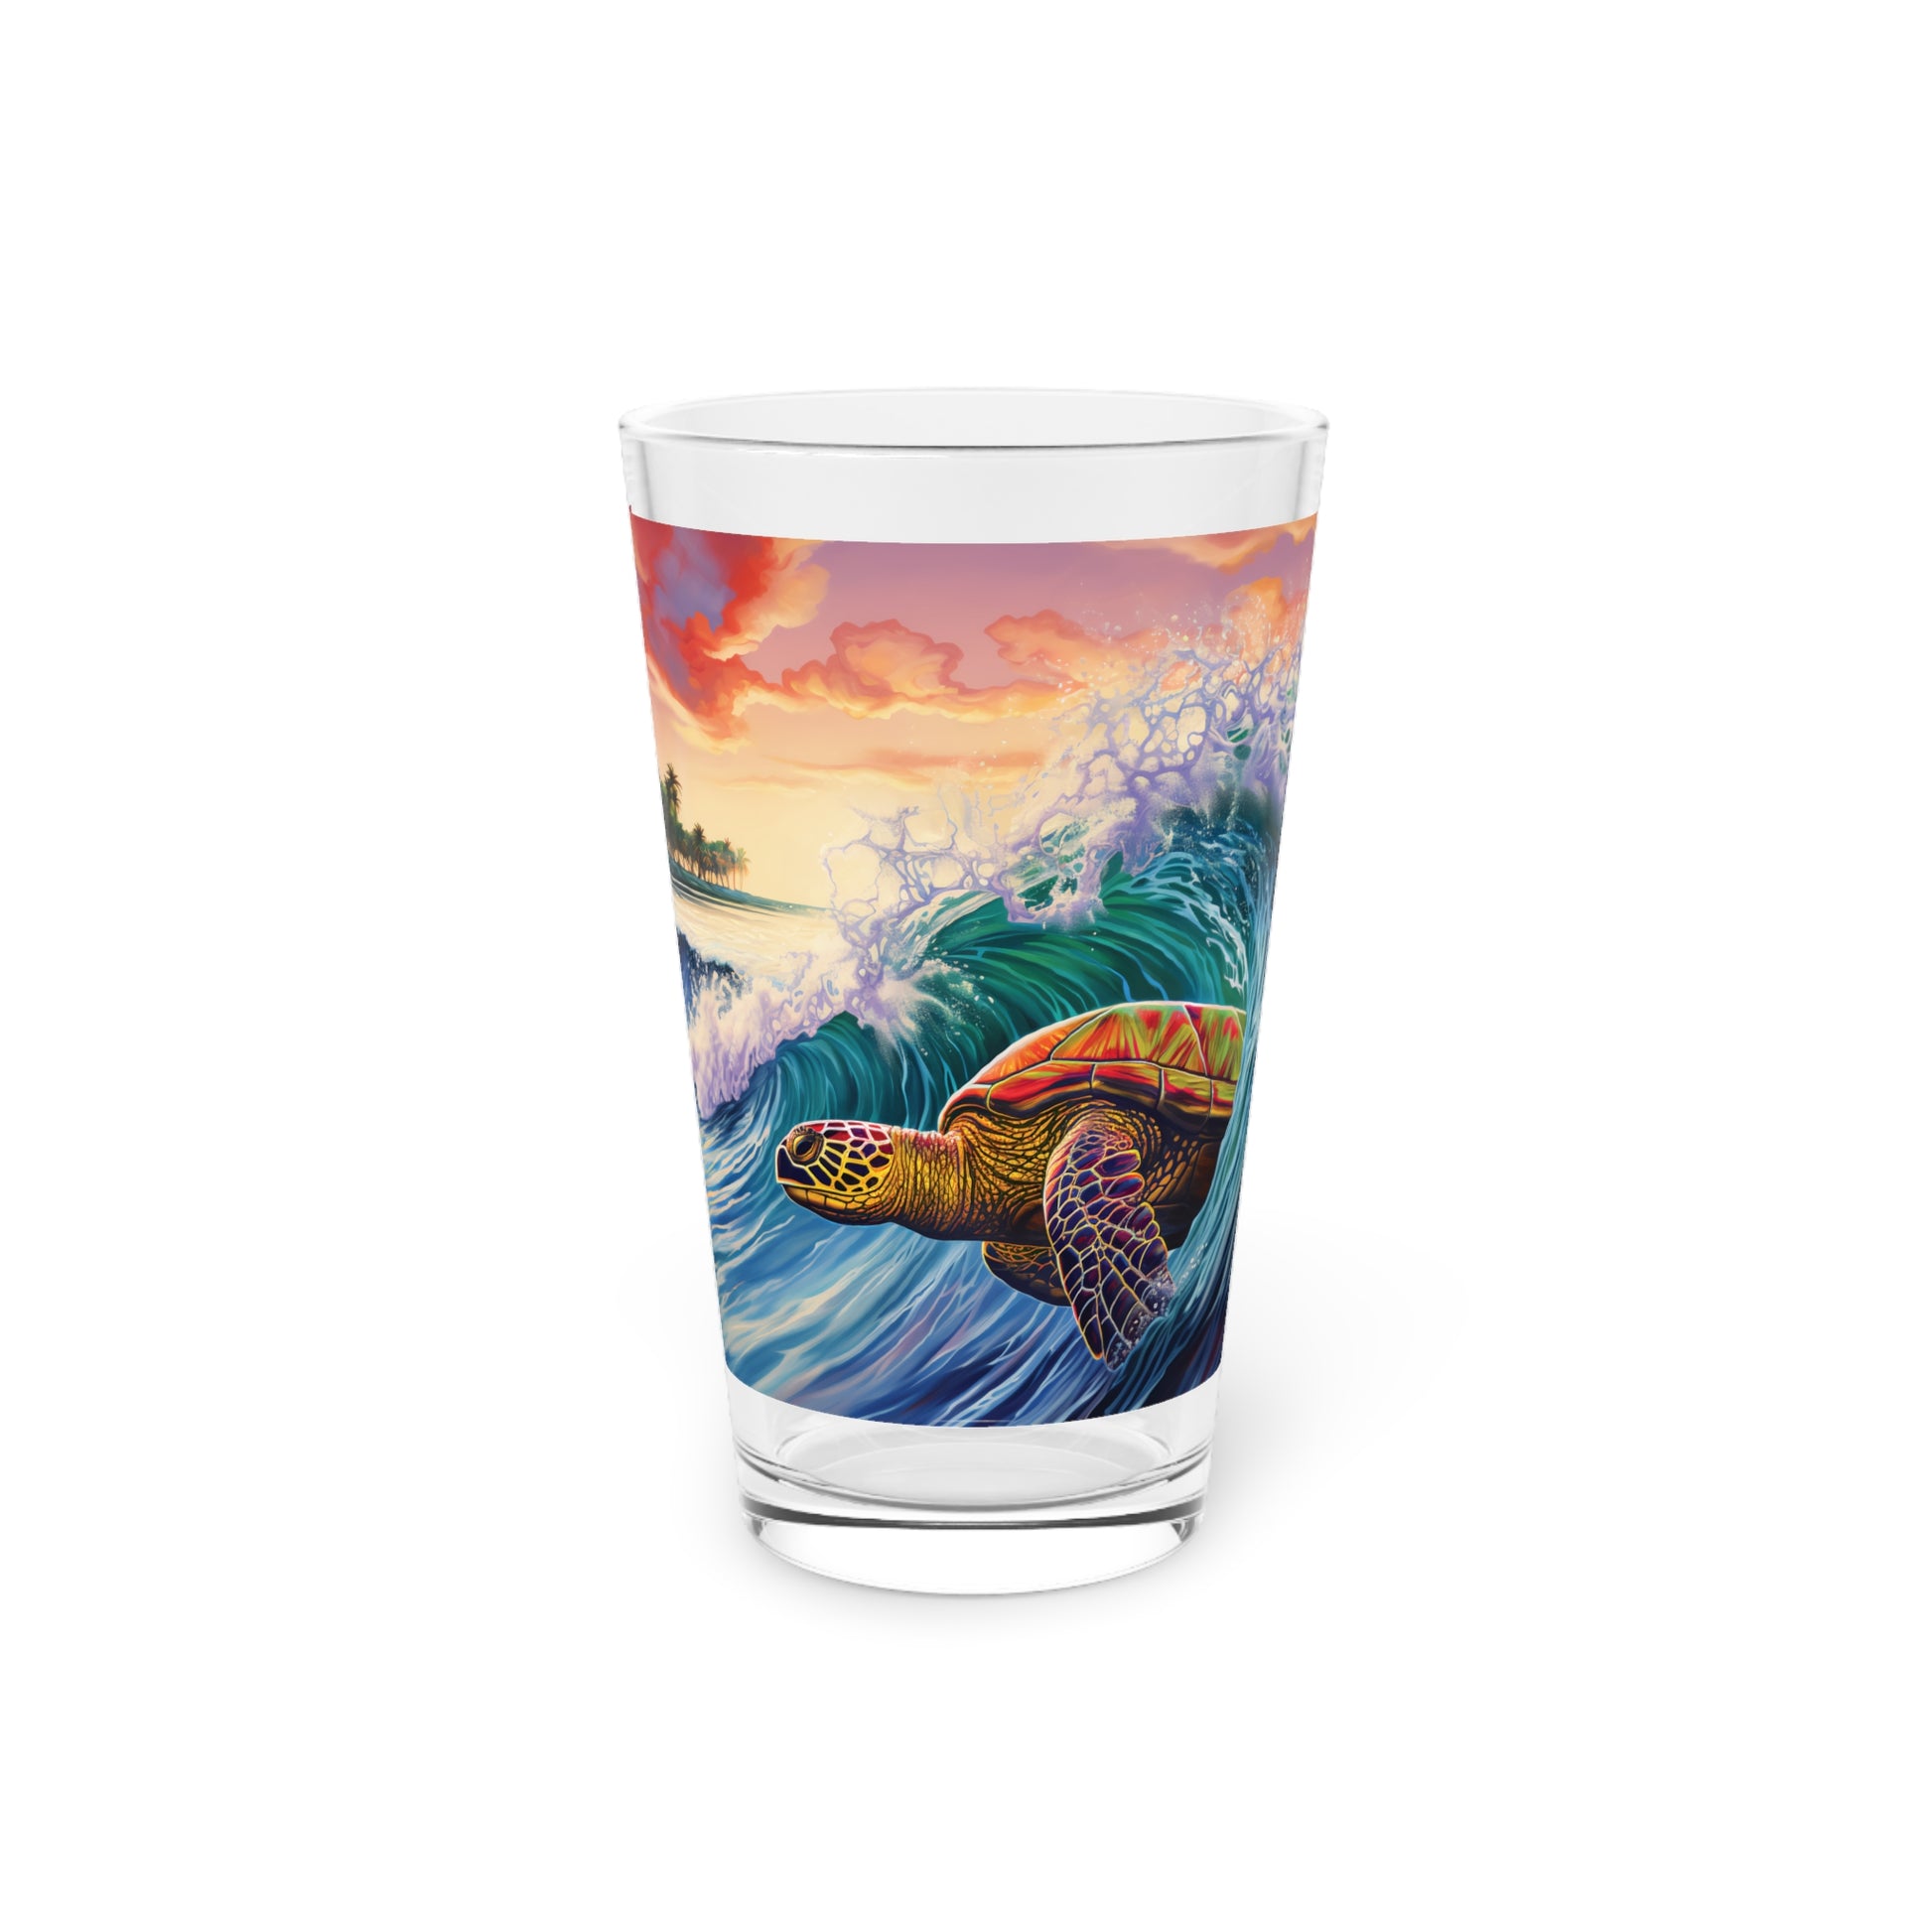 Dive into the spirit of Hawaii with our Turtle Surfing Waves Pint Glass, featuring Waves Design #009. This 16oz masterpiece by Stashbox captures the essence of tropical seas and the elegance of surfing turtles.